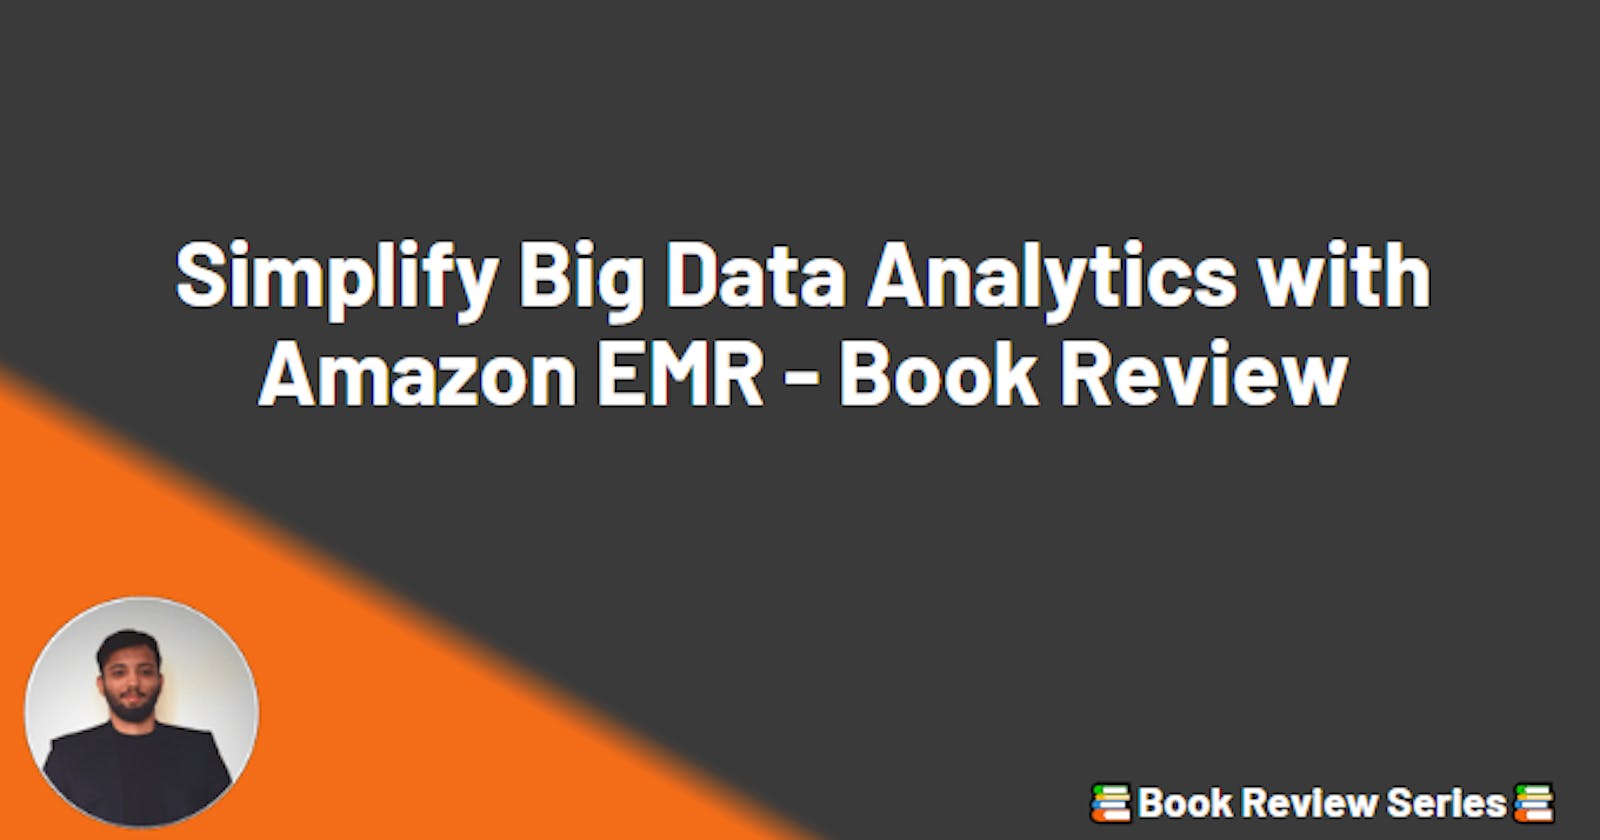 Simplify Big Data Analytics with Amazon EMR - Book Review